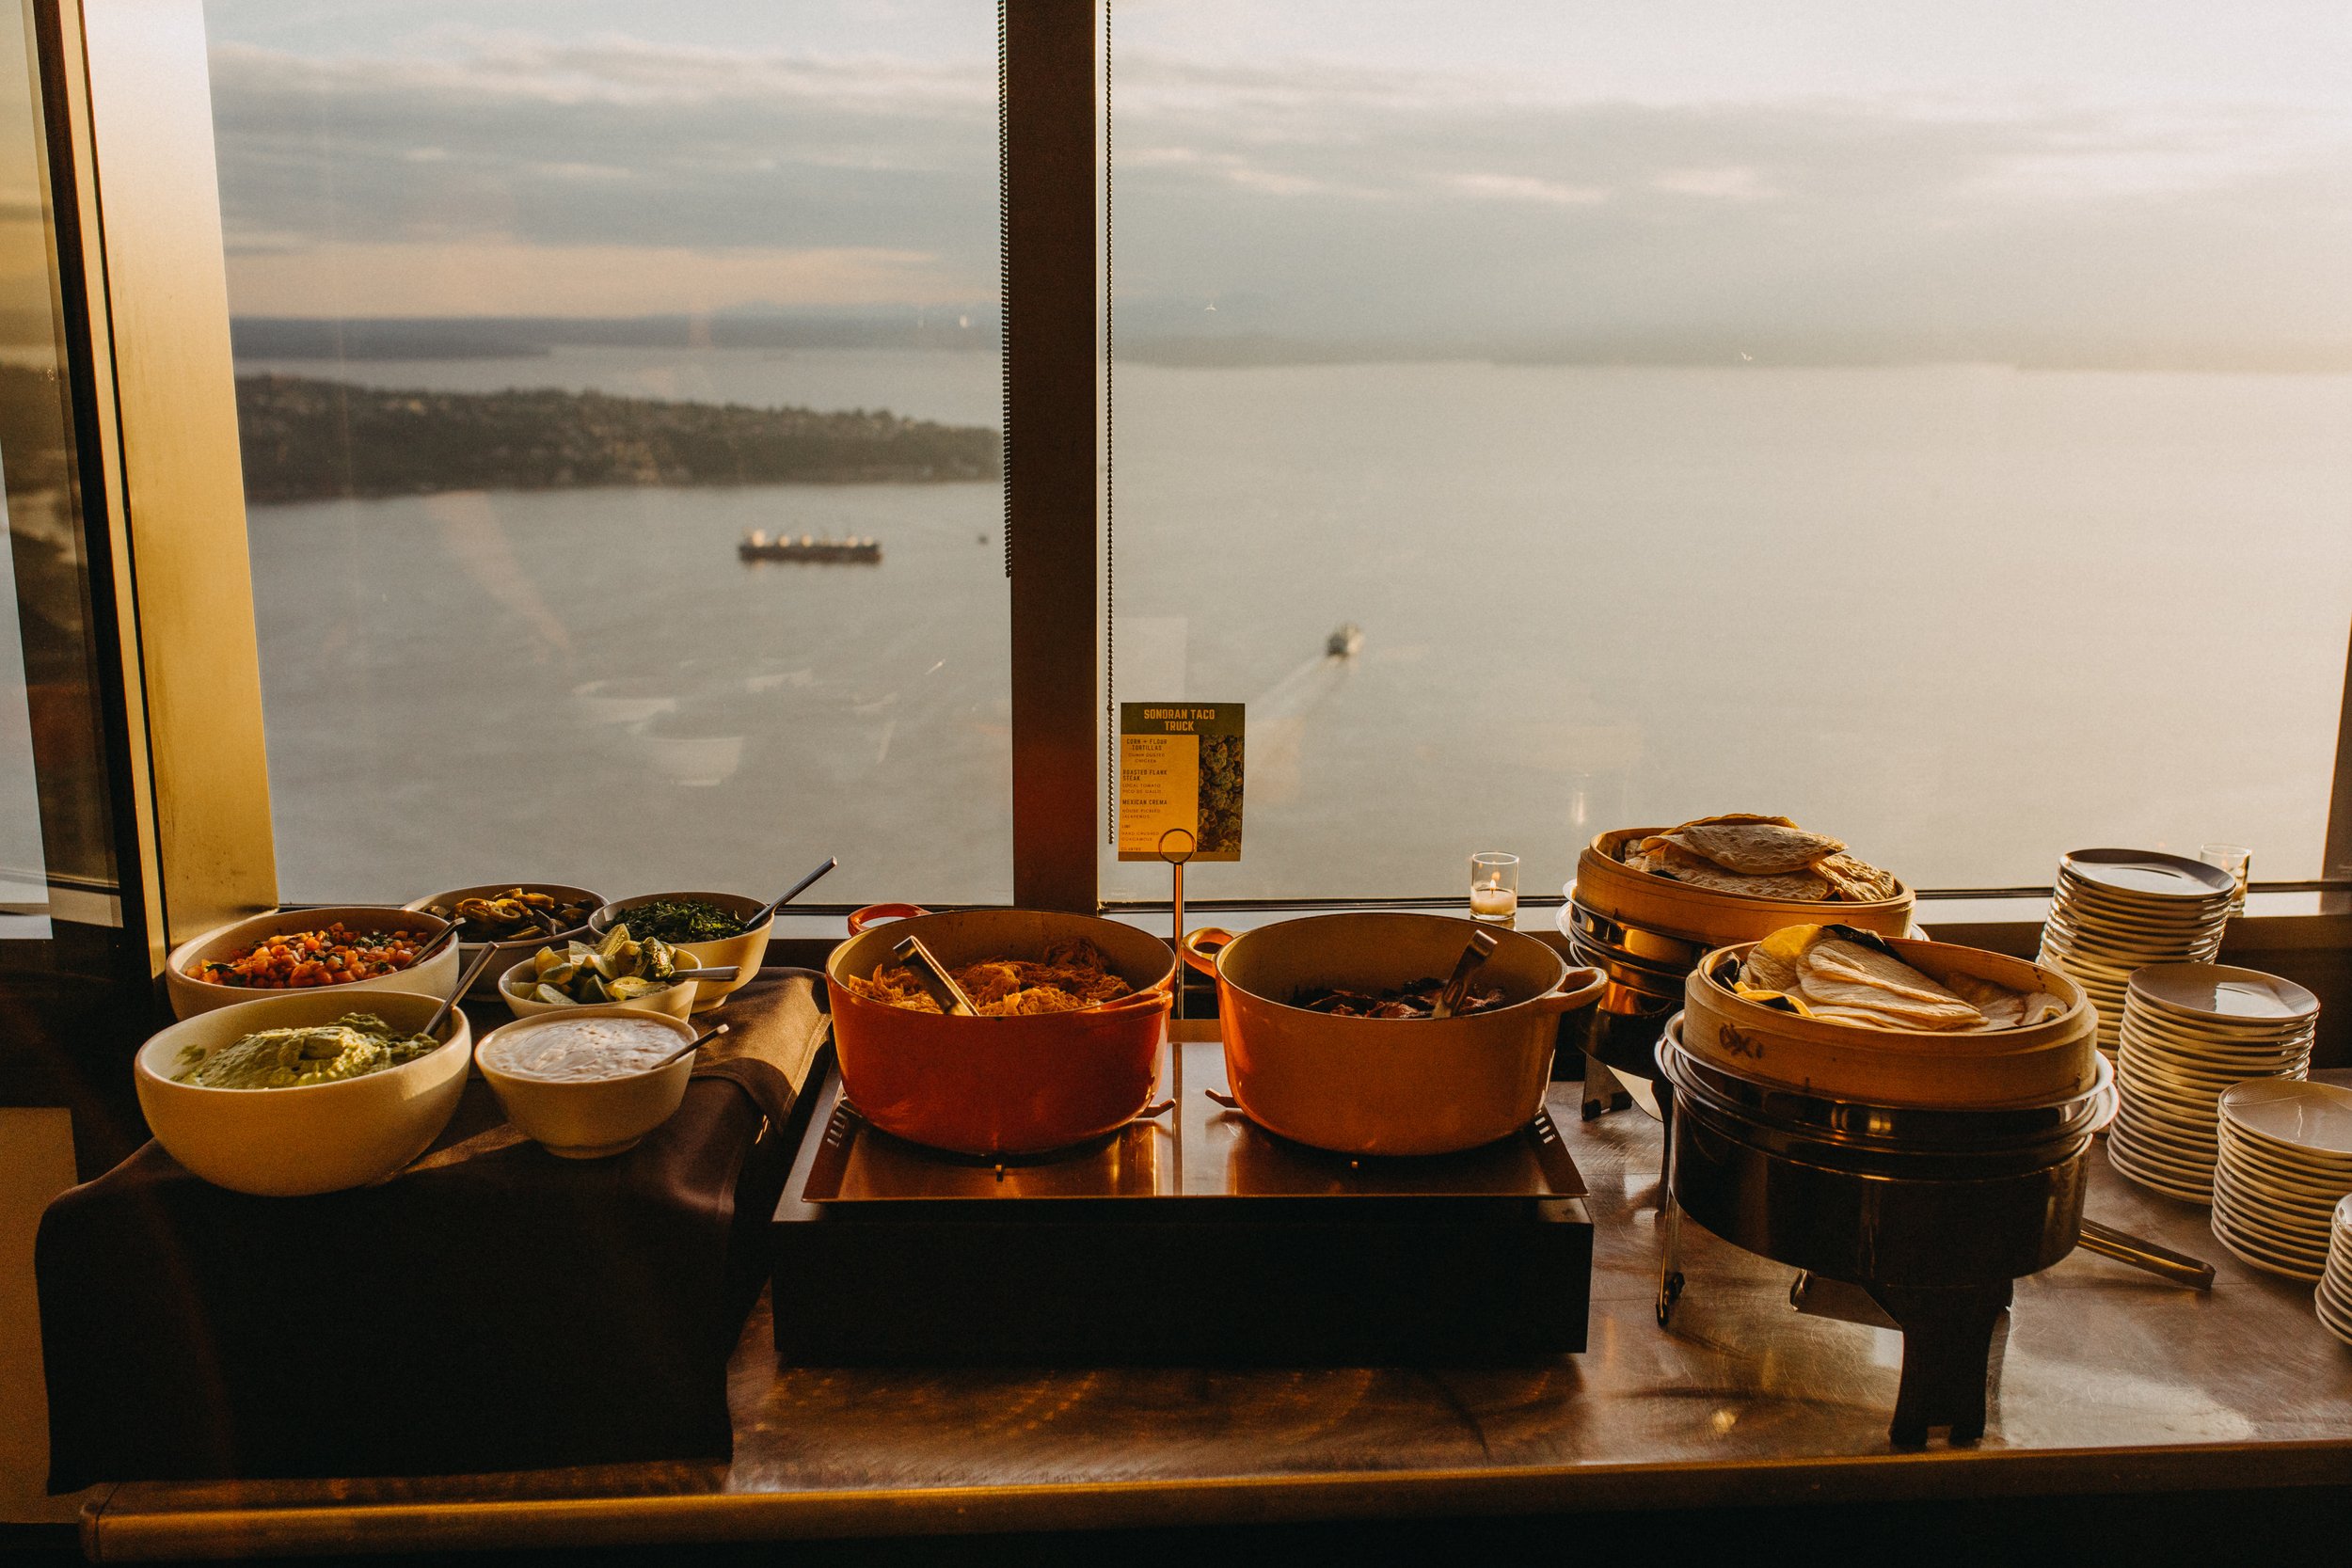  A late-night snack taco bar is set in front of a window overlooking Elliot Bay in Seattle.  